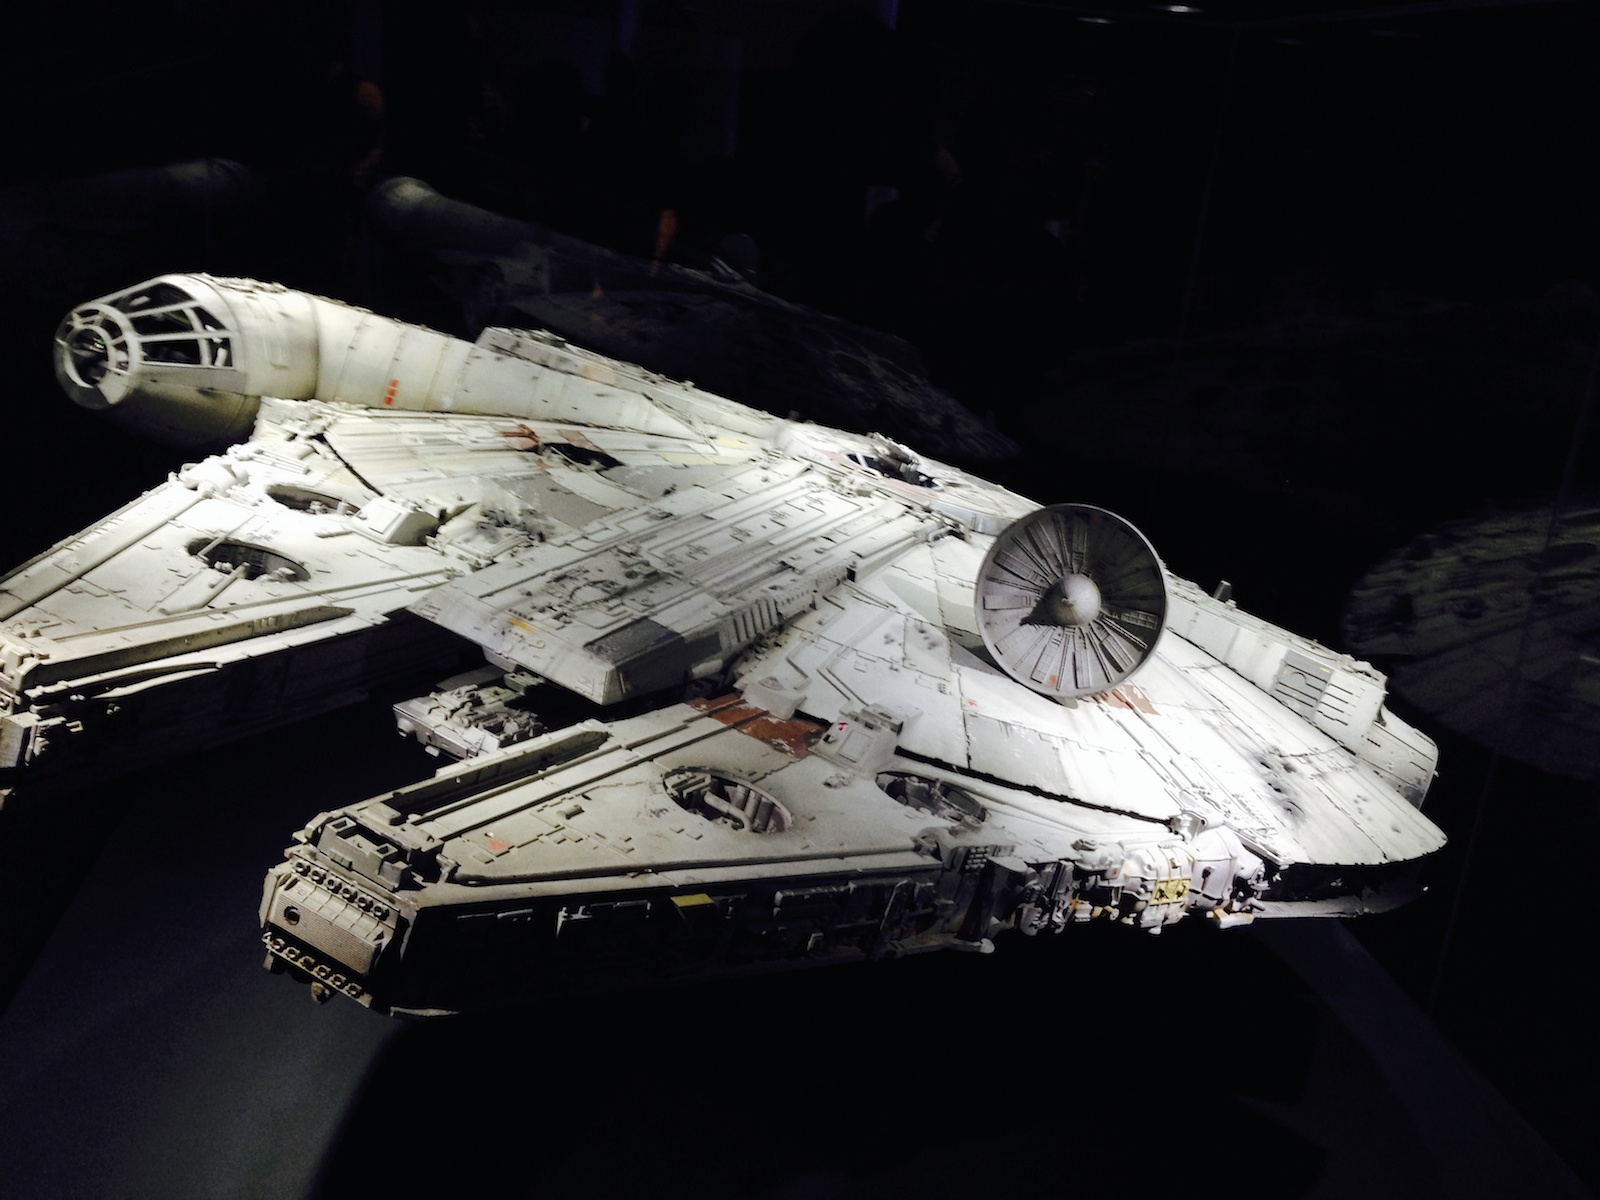 The Millennium Falcon - The Ultimate Hot Rod Space Ship